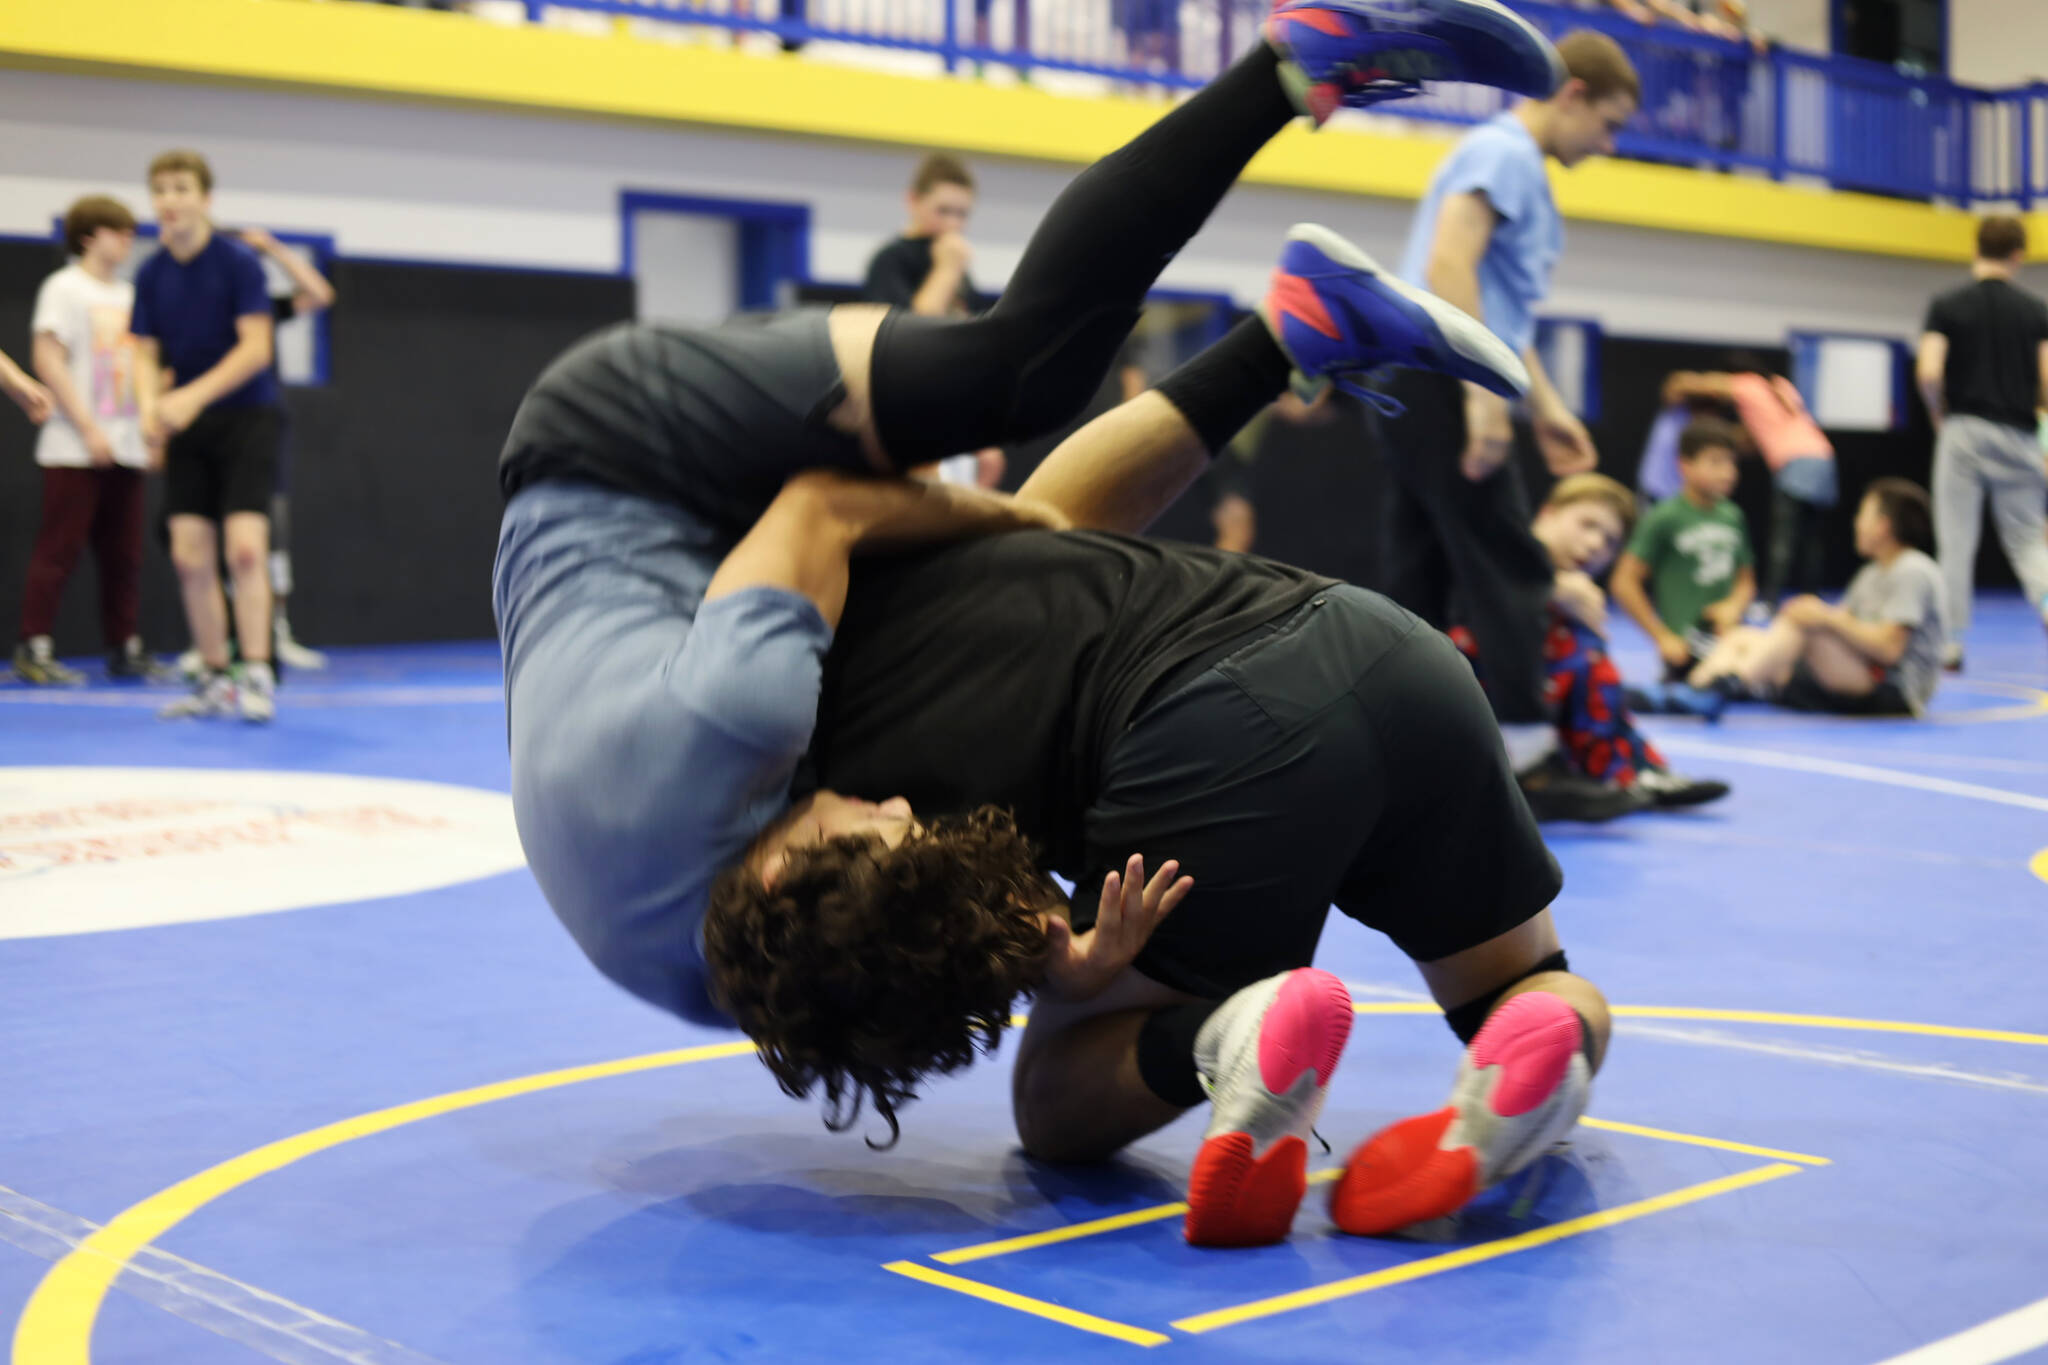 Clarise Larson / Juneau Empire
Hayden Aube and Justus Darbonne practice new moves while wrestling during a Labor Day weekend clinic at the Juneau Youth Wrestling Club’s new building on Monday.